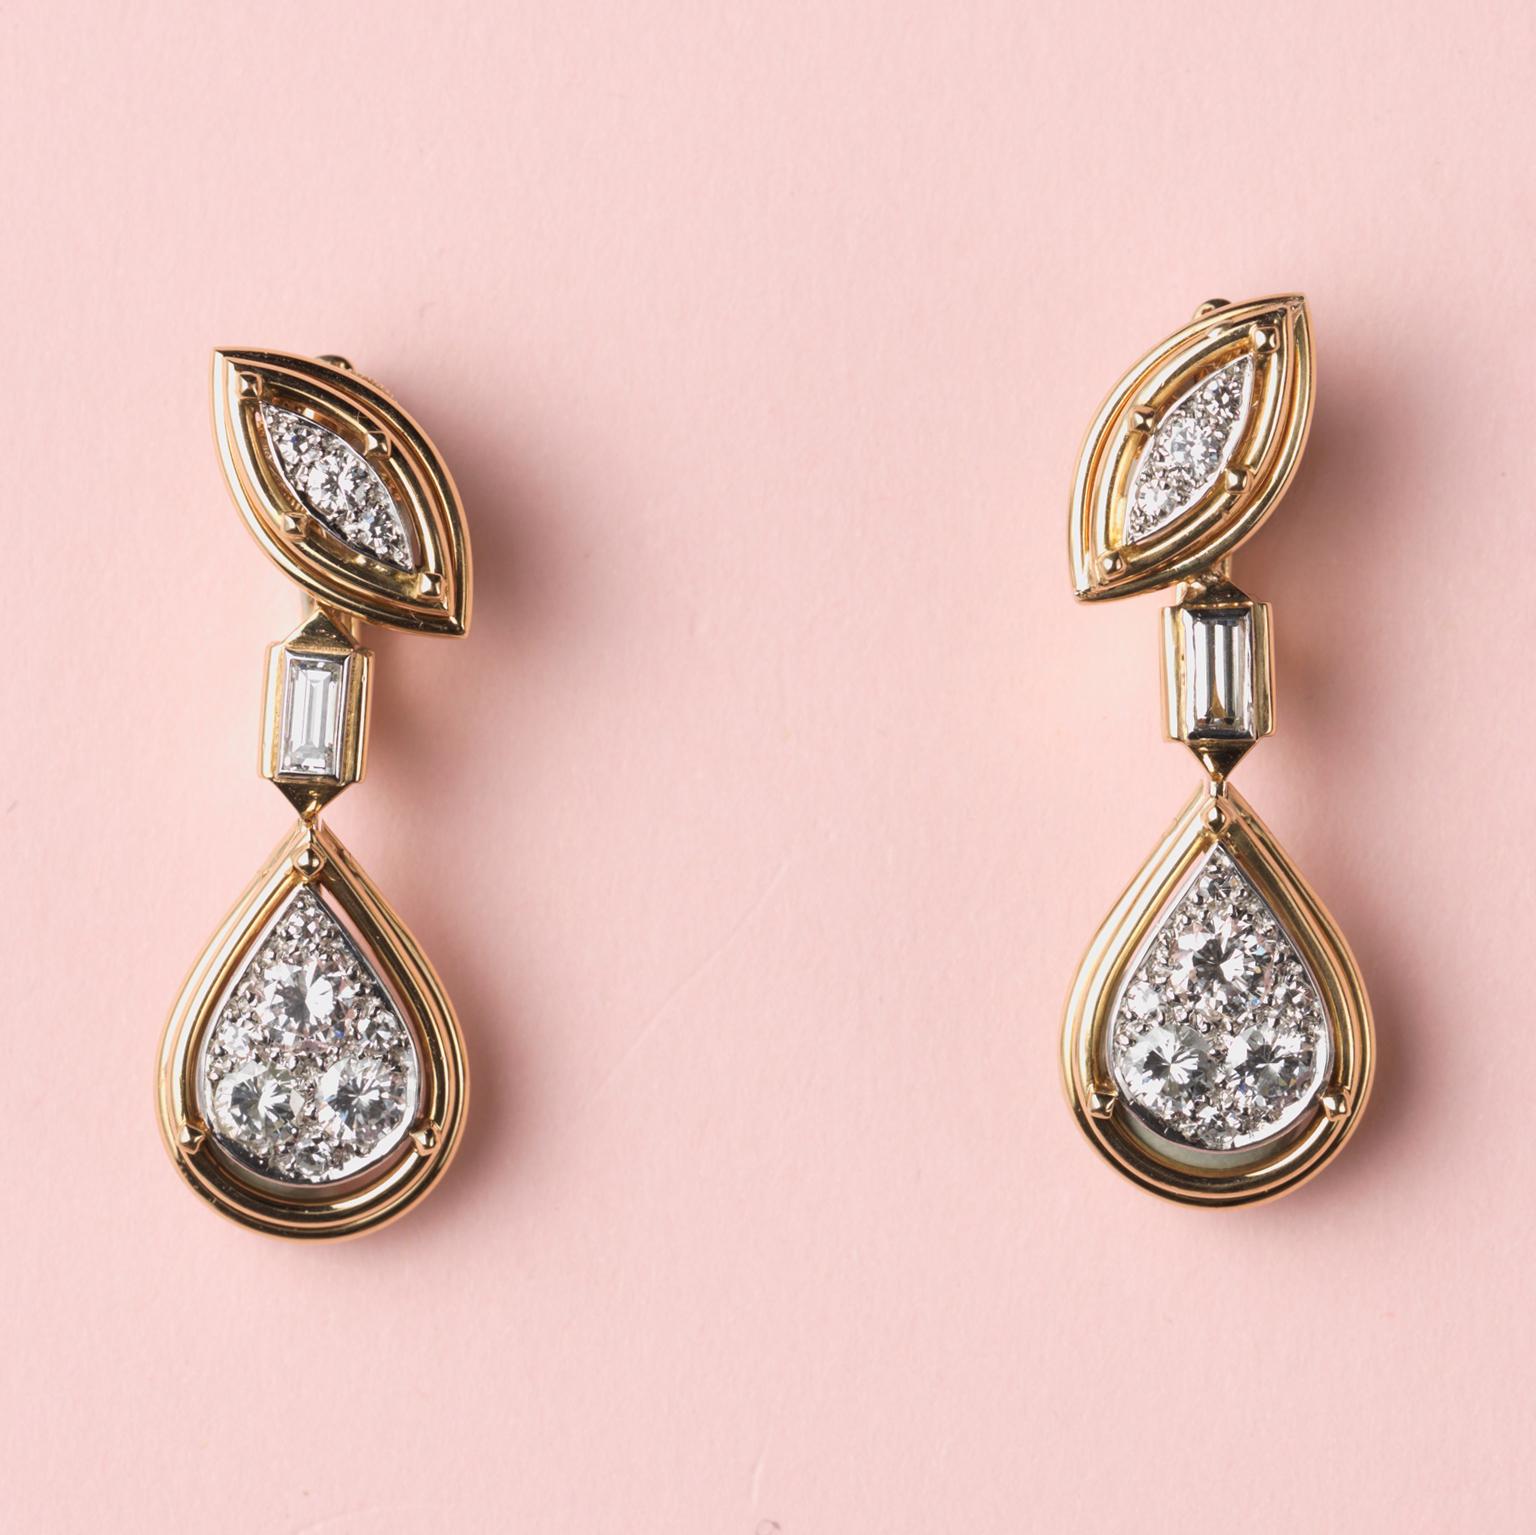 A pair of 18 carat gold and platinum earrings; with at the top a marquise shaped element of gold wire set with brilliant-cut diamonds, from which hangs – connected by a baguette-cut diamond – a pear-shaped drop with gold wire and diamonds, all set